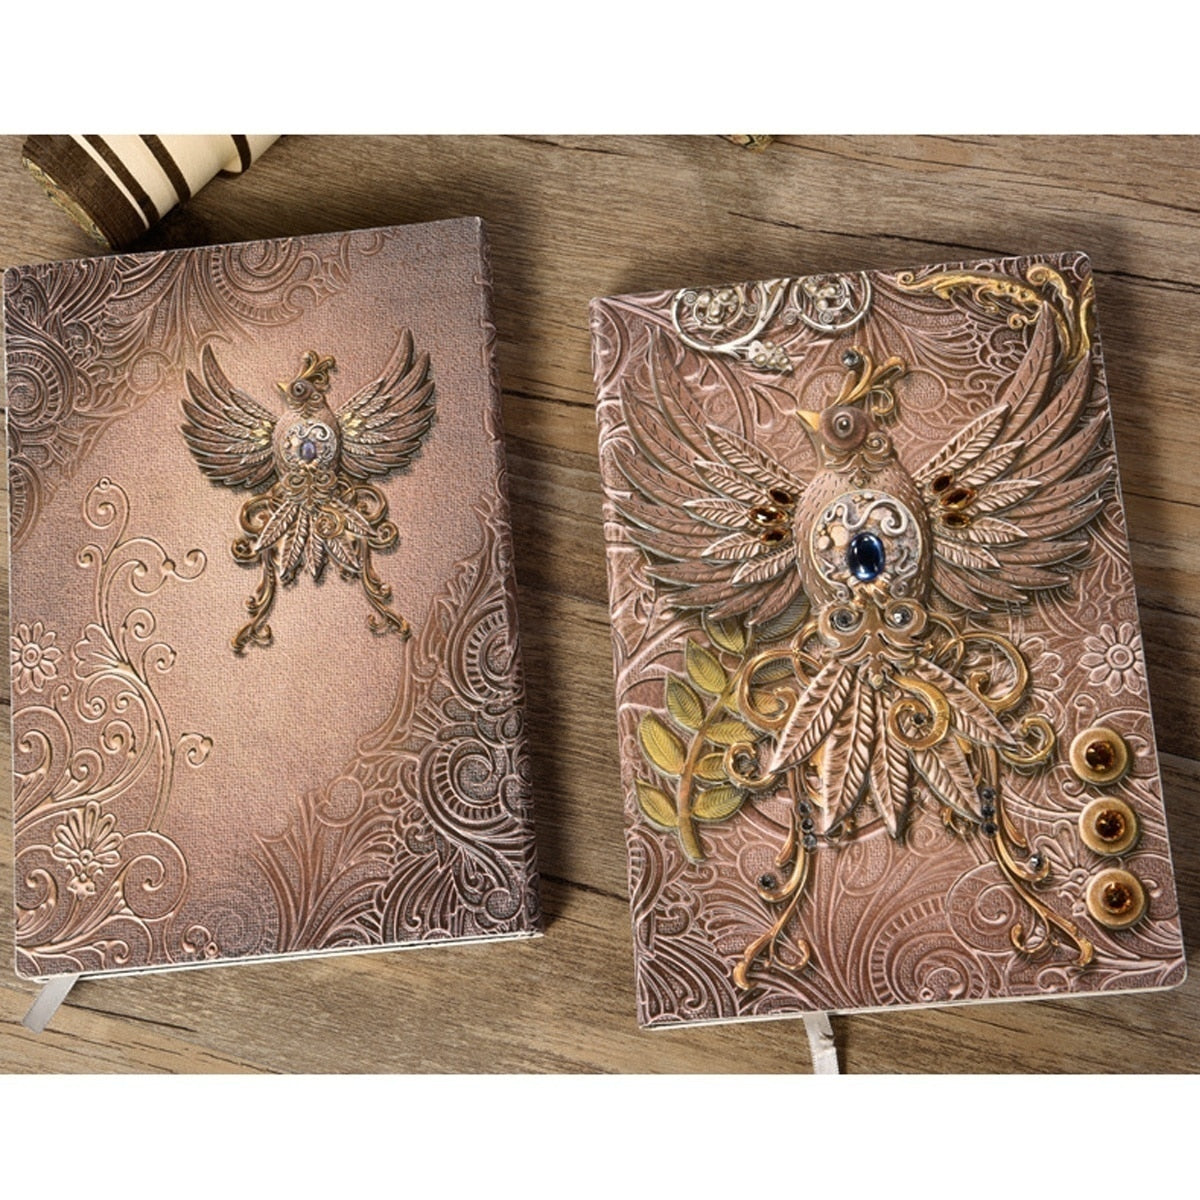 Fashion Vintage Embossed Leather Printing Travel Diary Notebook Travel Journal A5-Note Book 1pcs 0 Taverna da Ilsa 